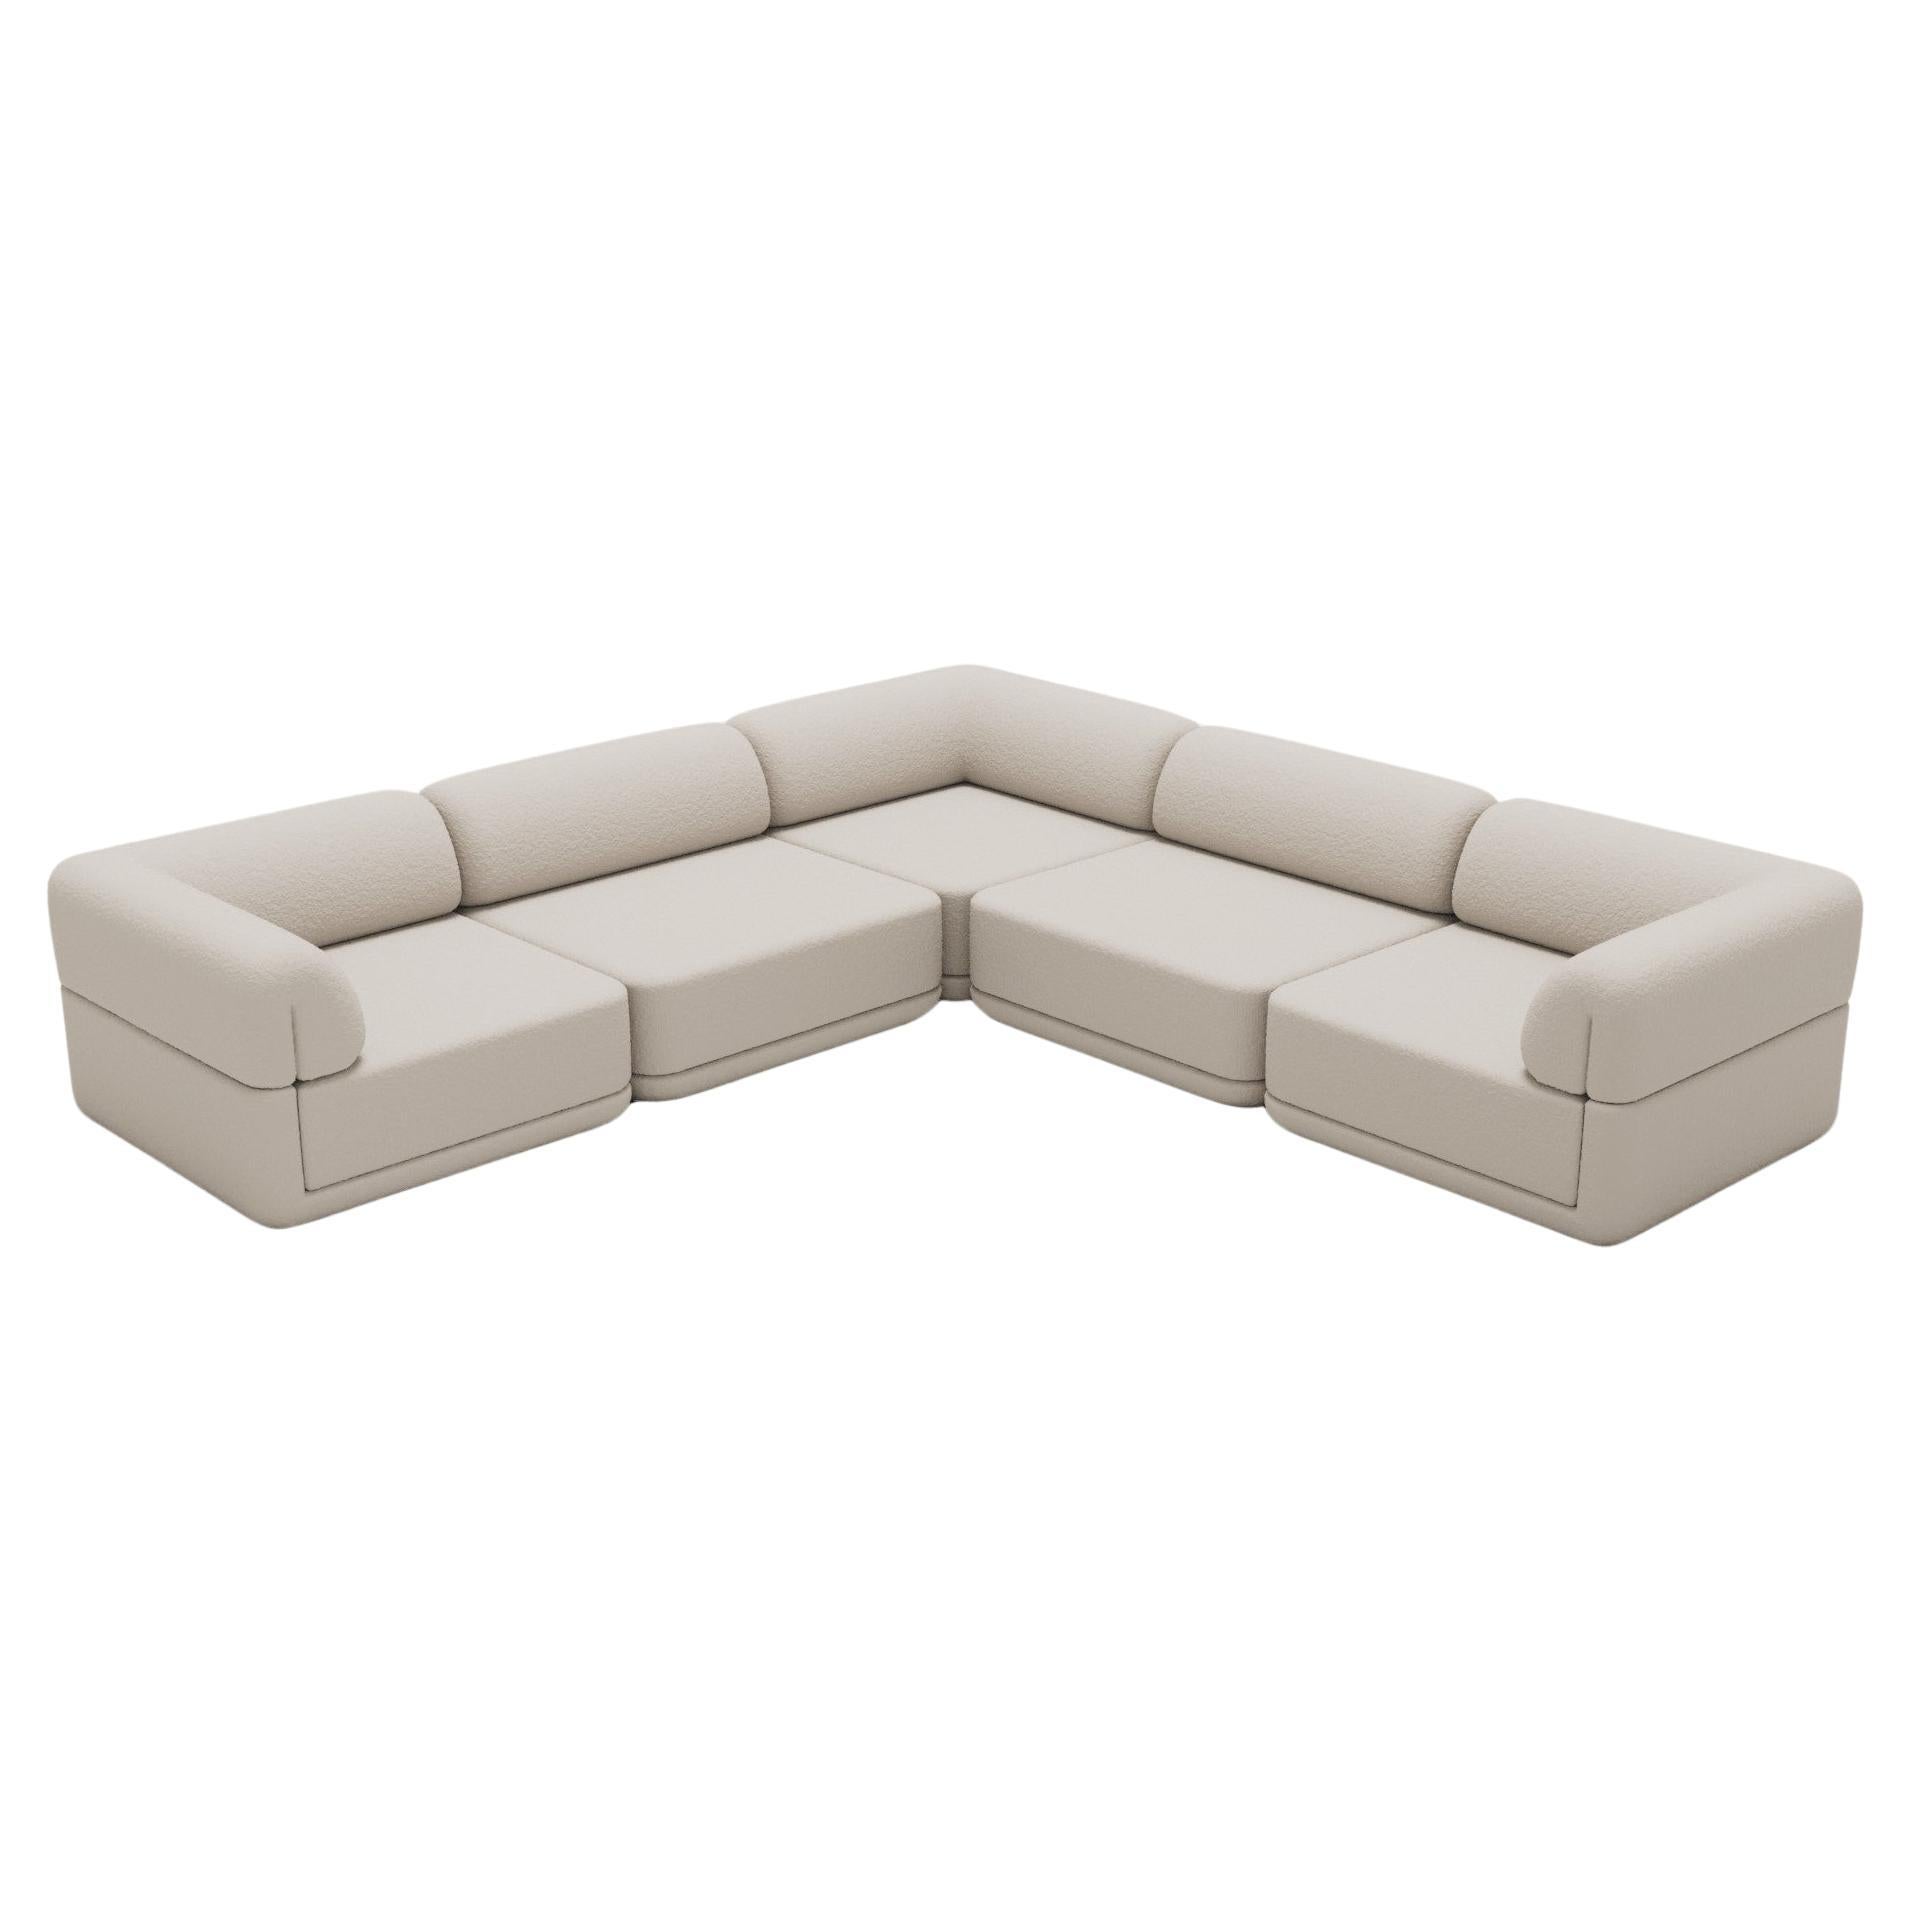 The Cube Sofa - Coin Lounge Sectional